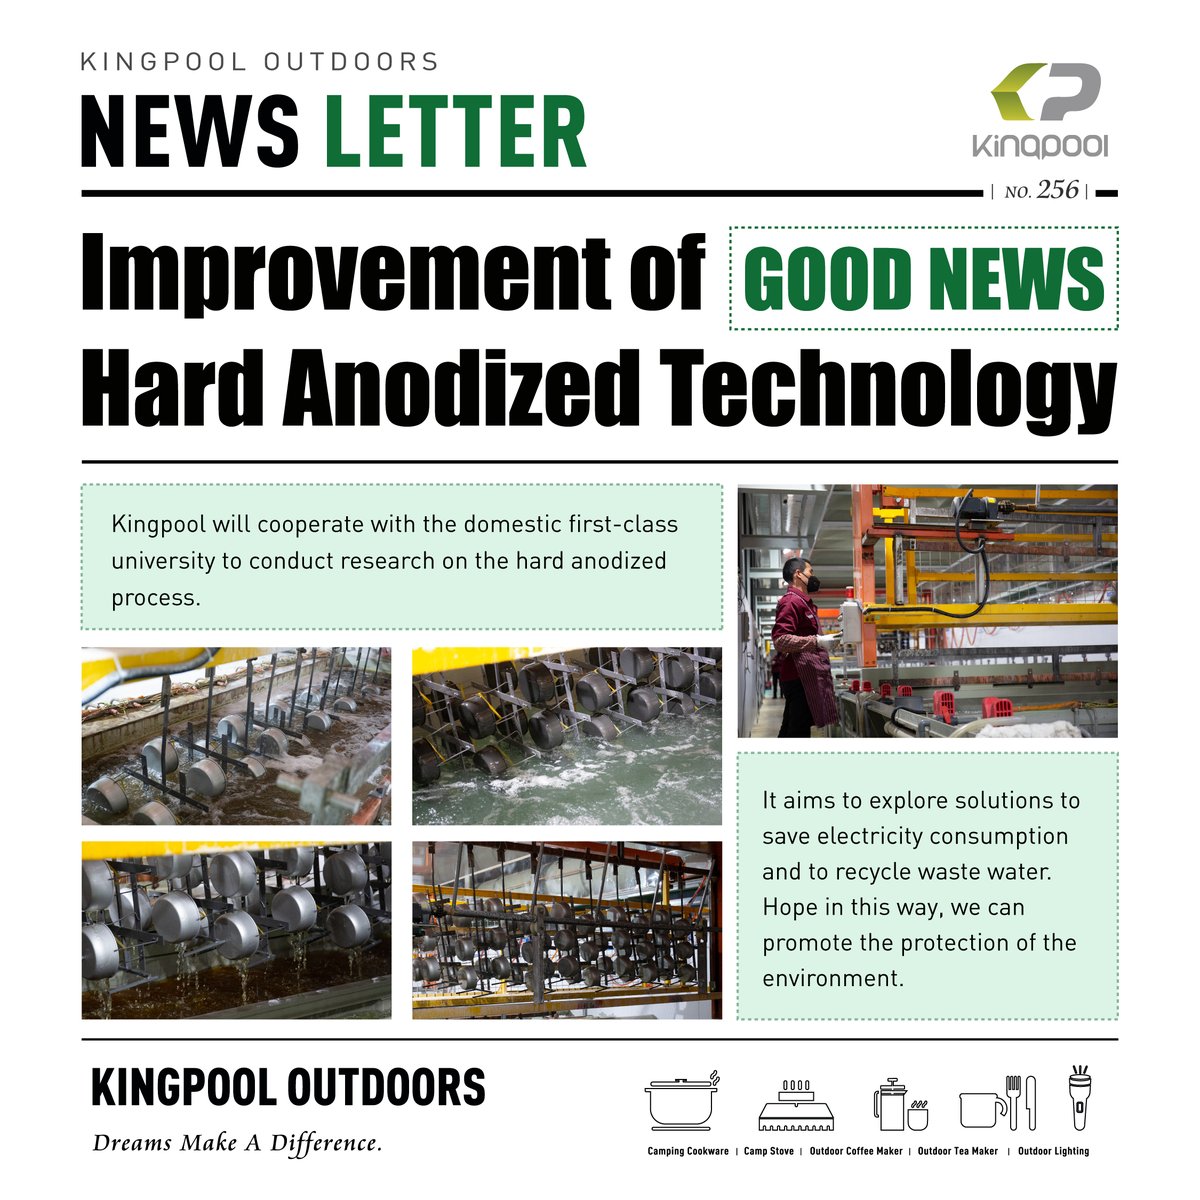 /
Improvement of GOOD NEWS
\
Kingpool will cooperate with the domestic first-class university to conduct research on the hard anodized process.

We continue to innovate and develop, and are committed to professional outdoor products.

#Hardwork #AutumnIsComing #CampingWorldSRX